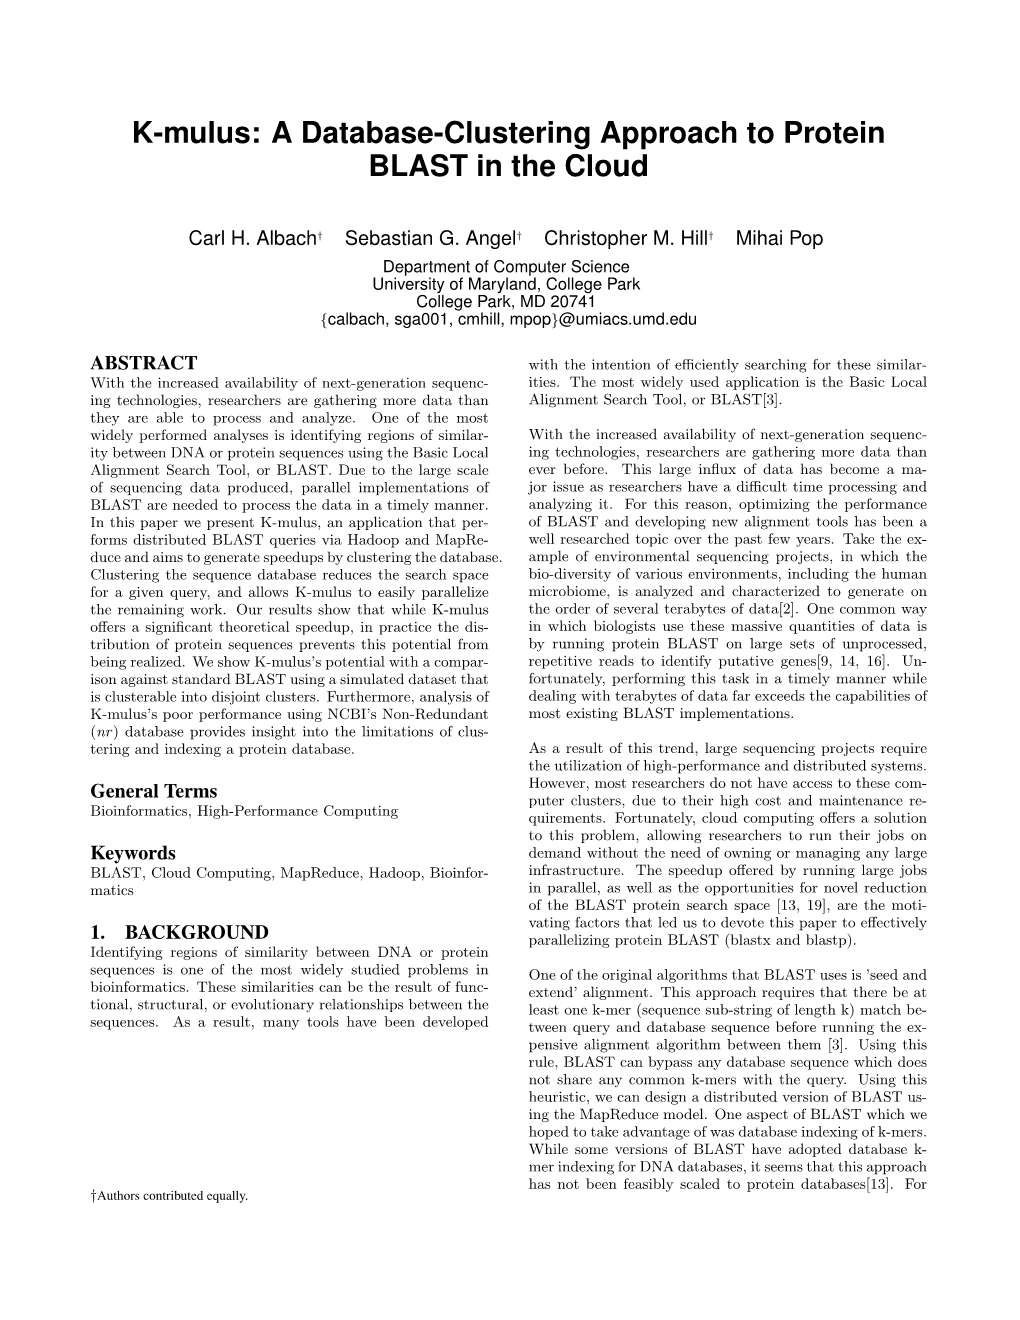 K-Mulus: a Database-Clustering Approach to Protein BLAST in the Cloud